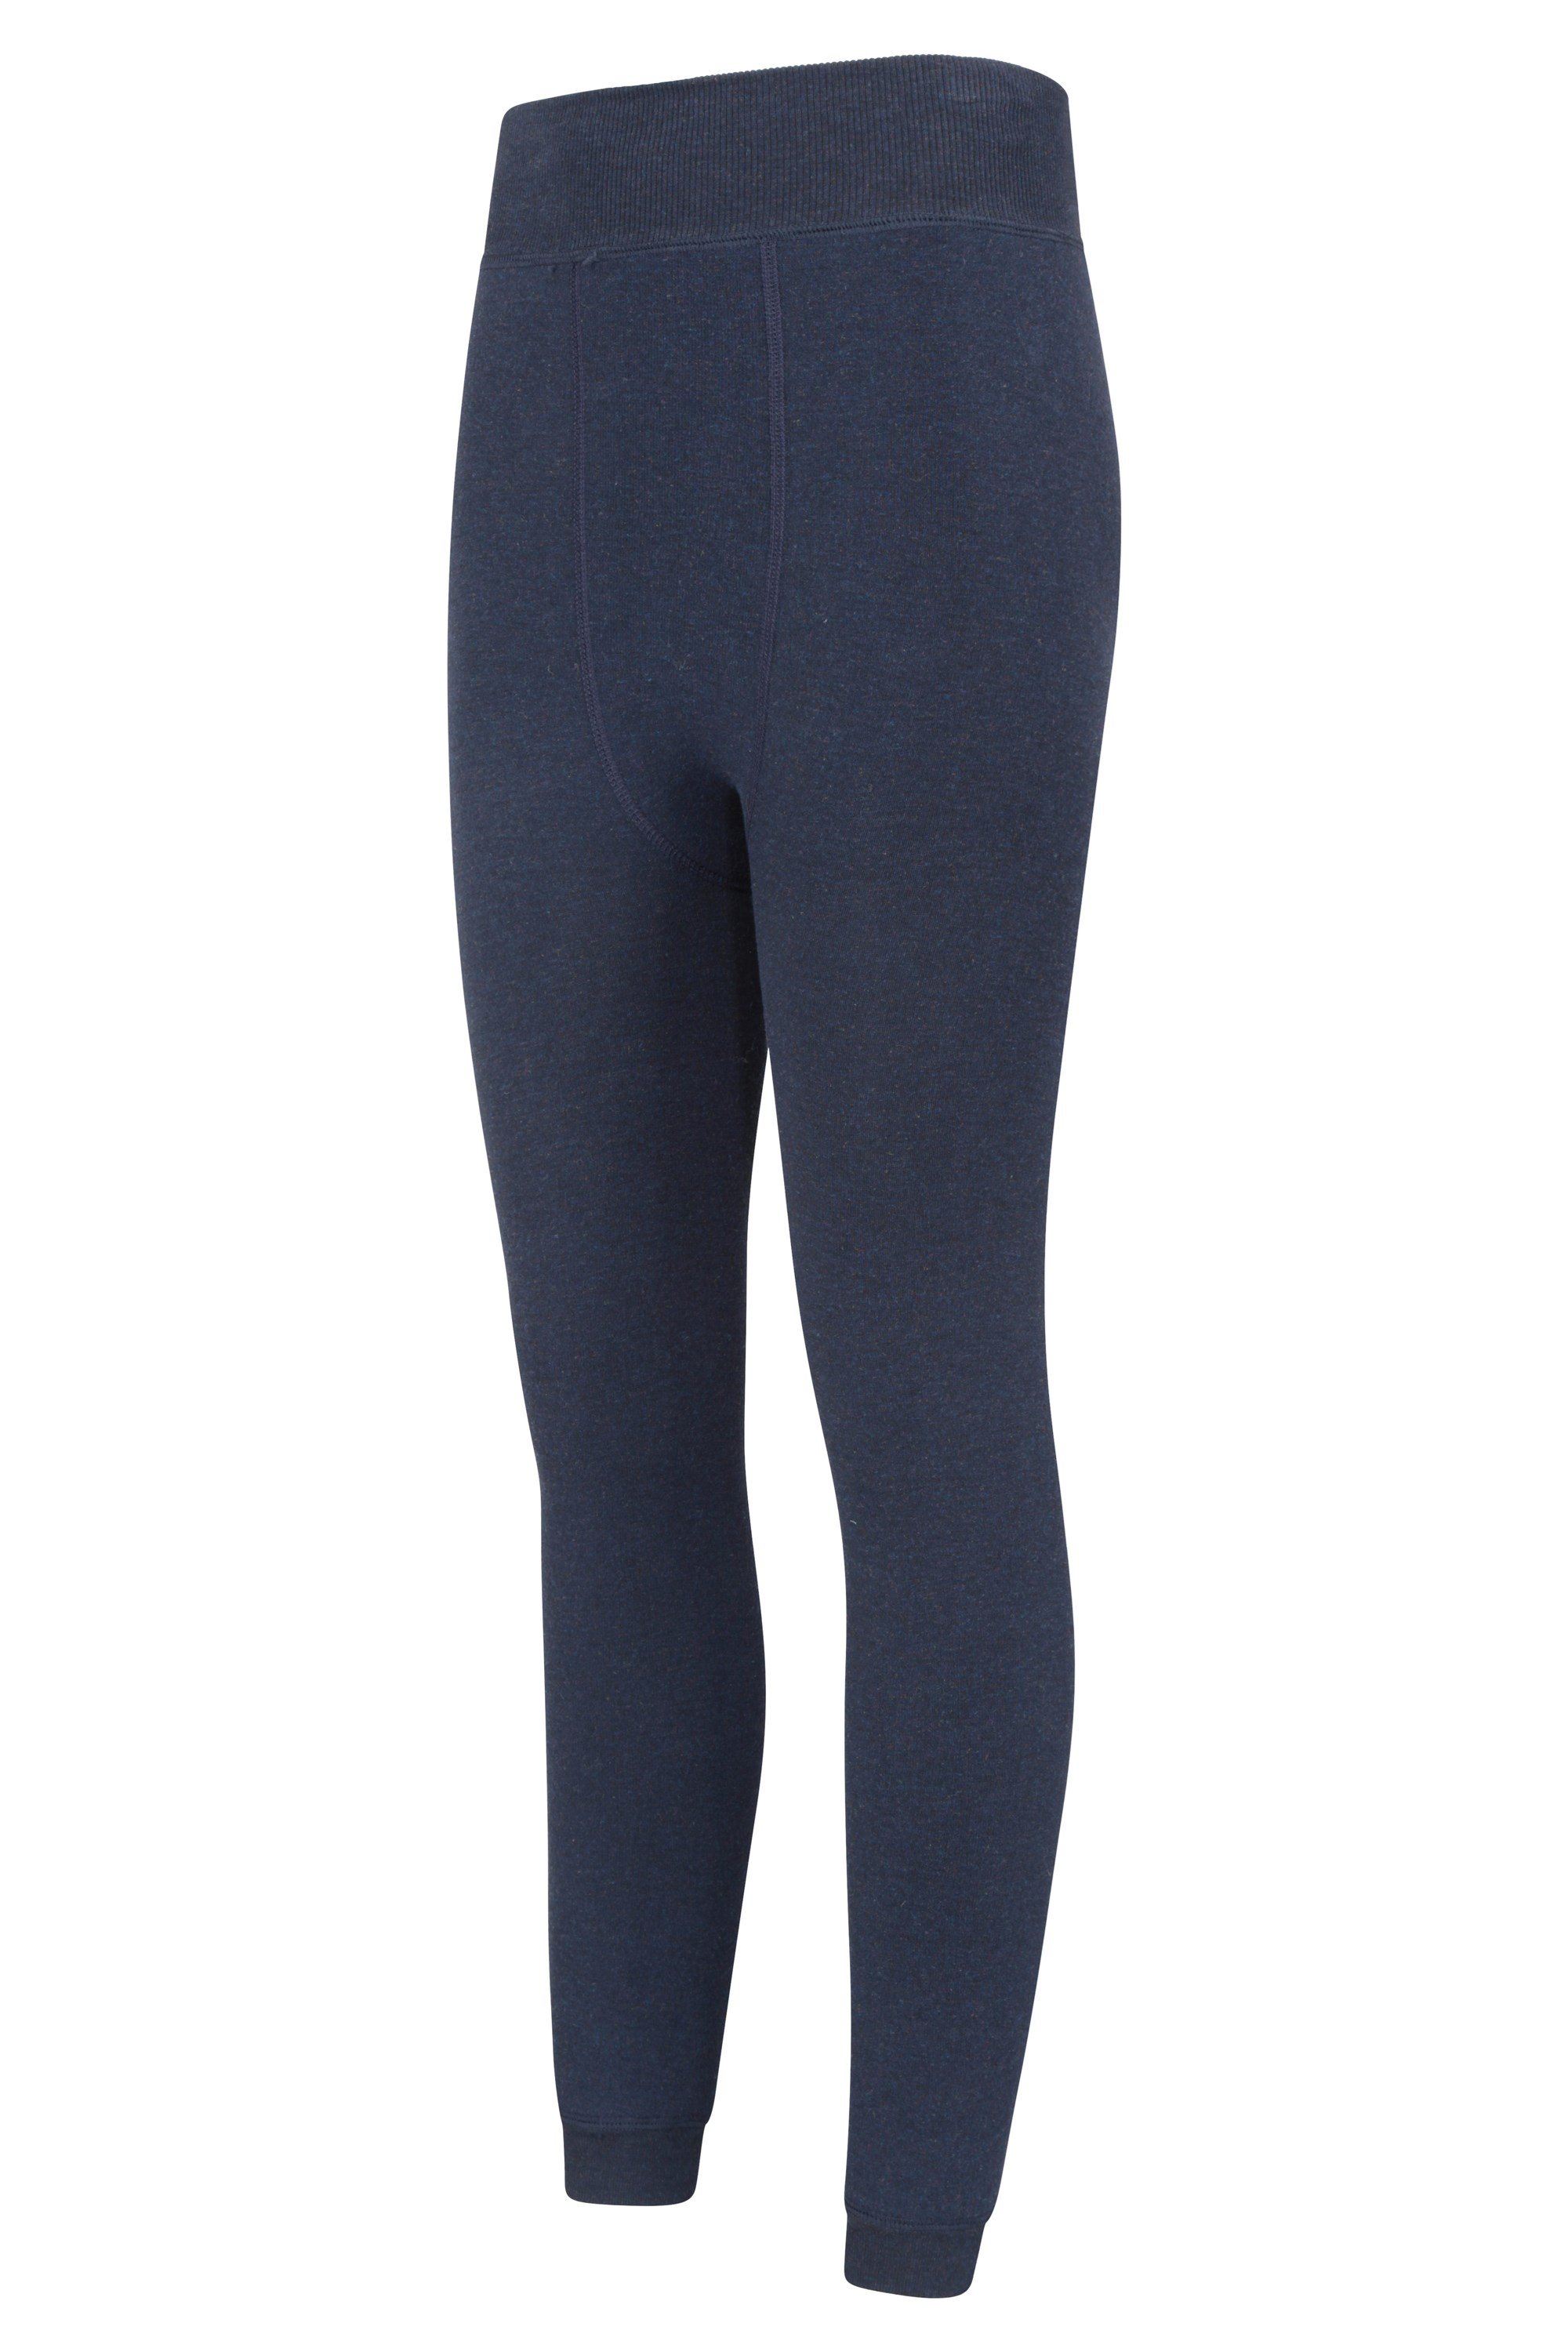 Womens Fluffy Fleece Lined Tights